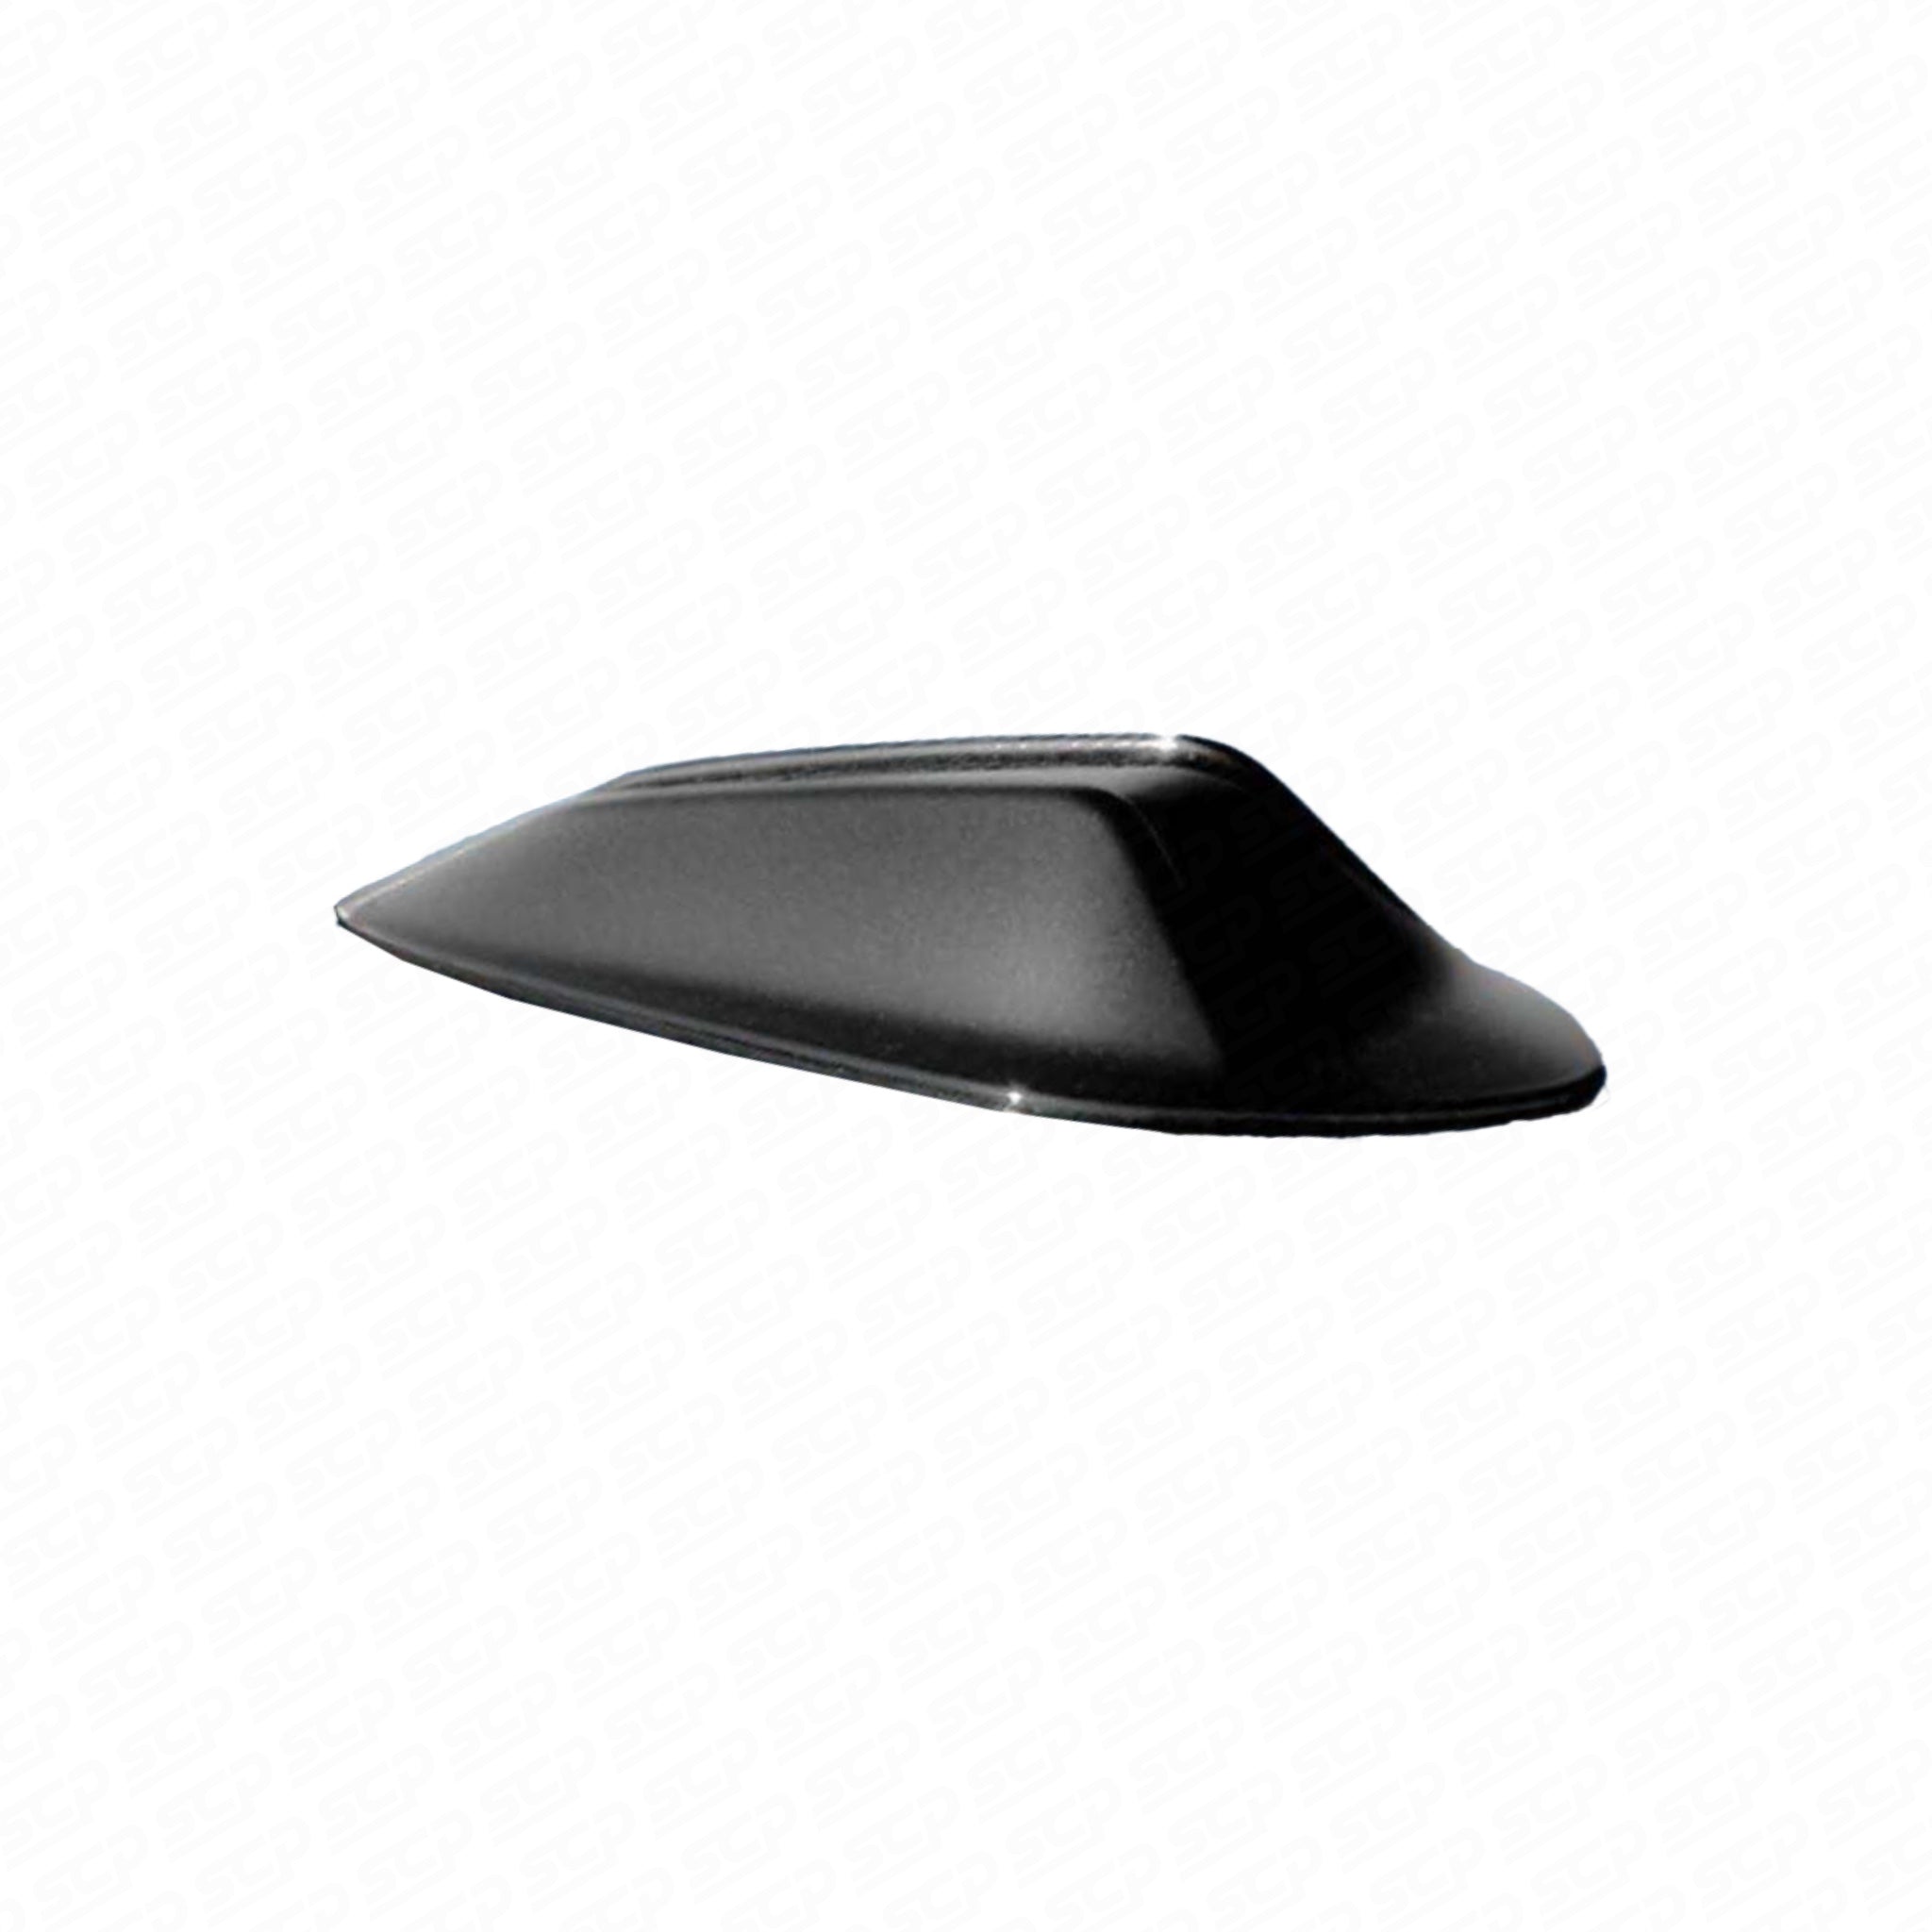 BMW Aerial Cover for G-Series (Variant 5)